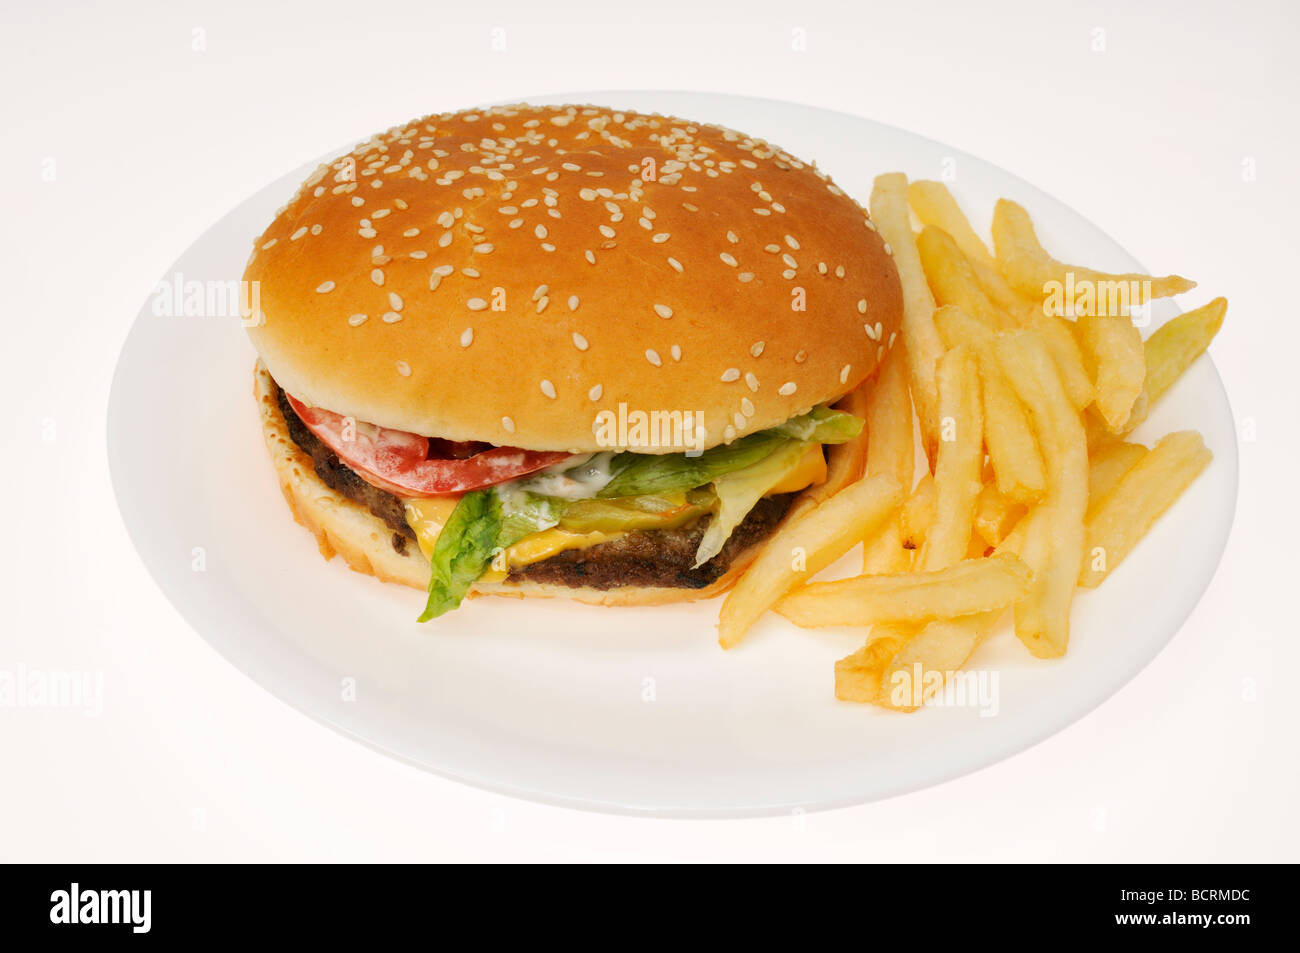 Whopper burger and chips or fries from Burger King on white plate on white background, cutout. Stock Photo